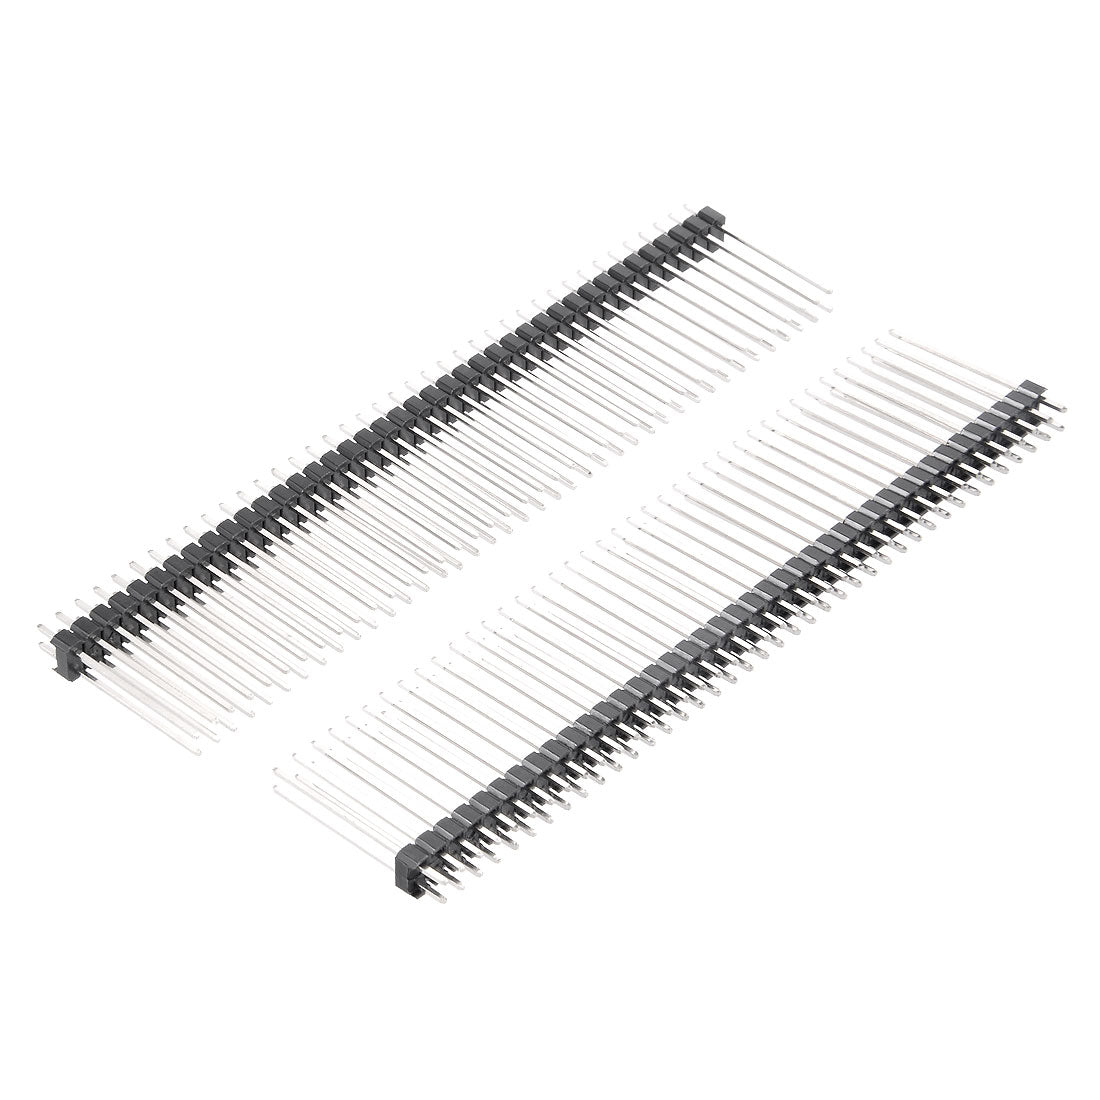 uxcell Uxcell 10Pcs 2.54mm Pitch 40-Pin 21mm Length Double Row Straight Connector Pin Header Strip for Arduino Prototype Shield